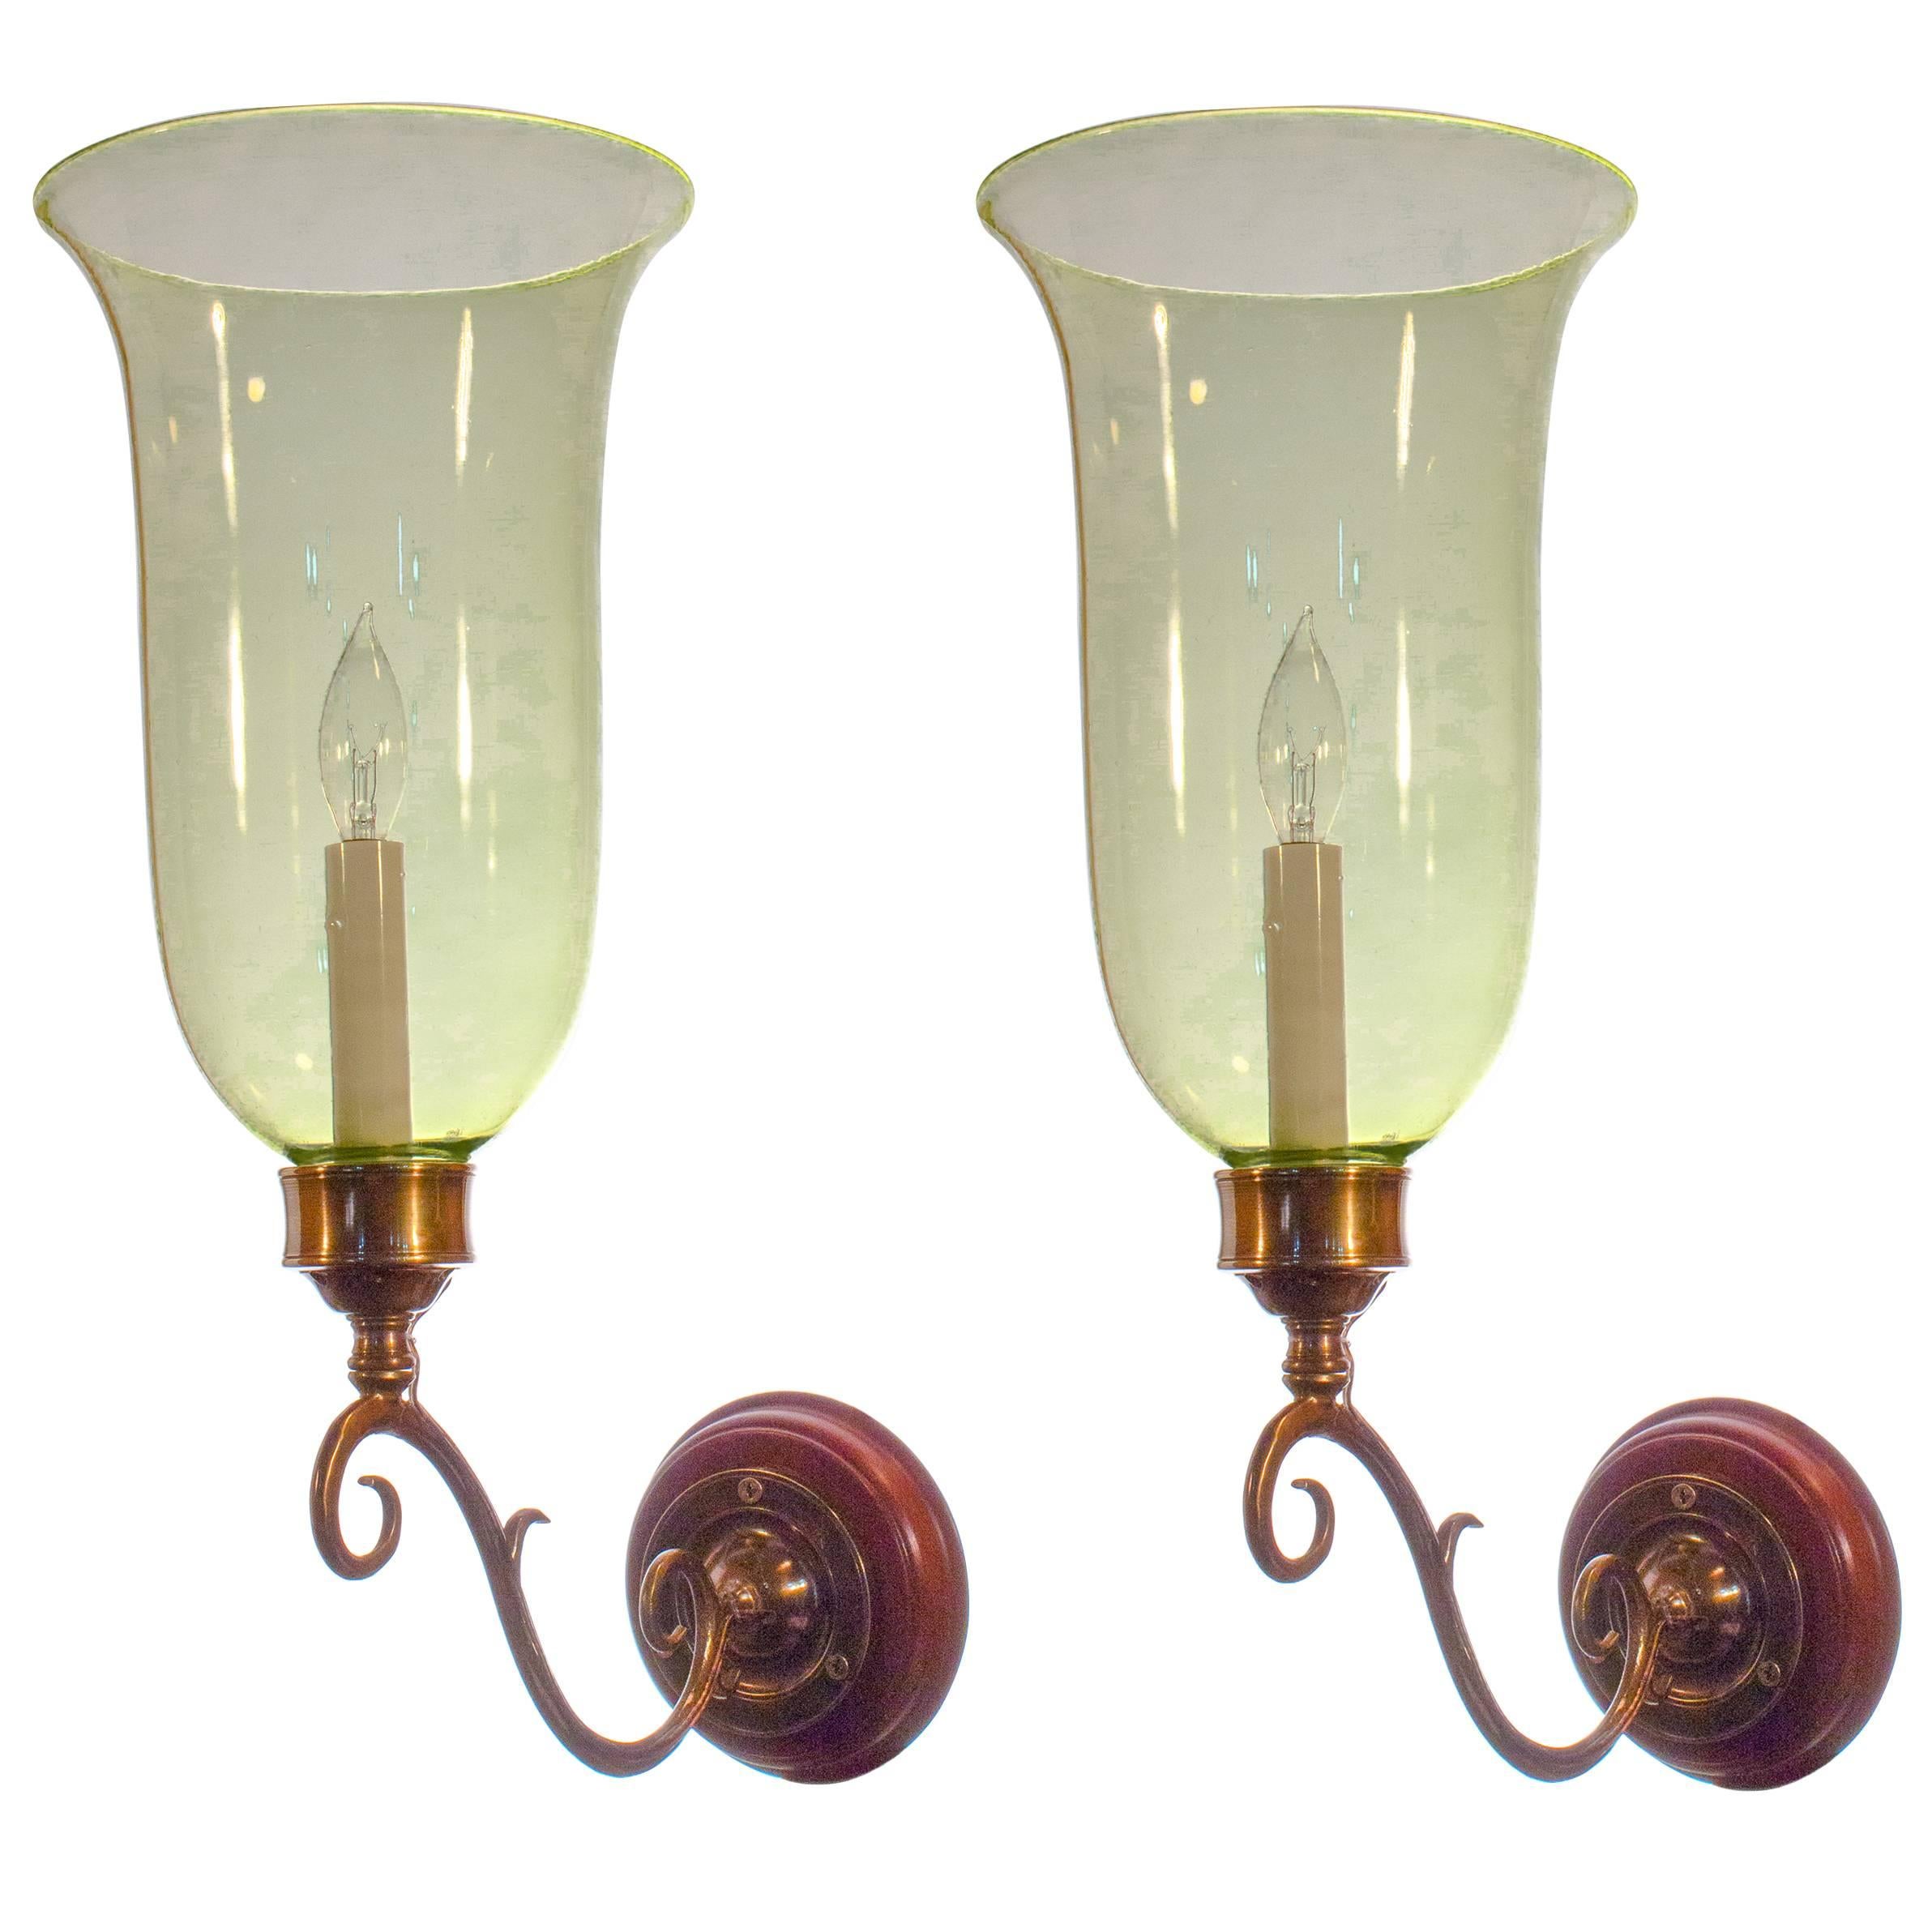 Pair of 19th Century English Hurricane Shade Sconces with Vaseline Tint